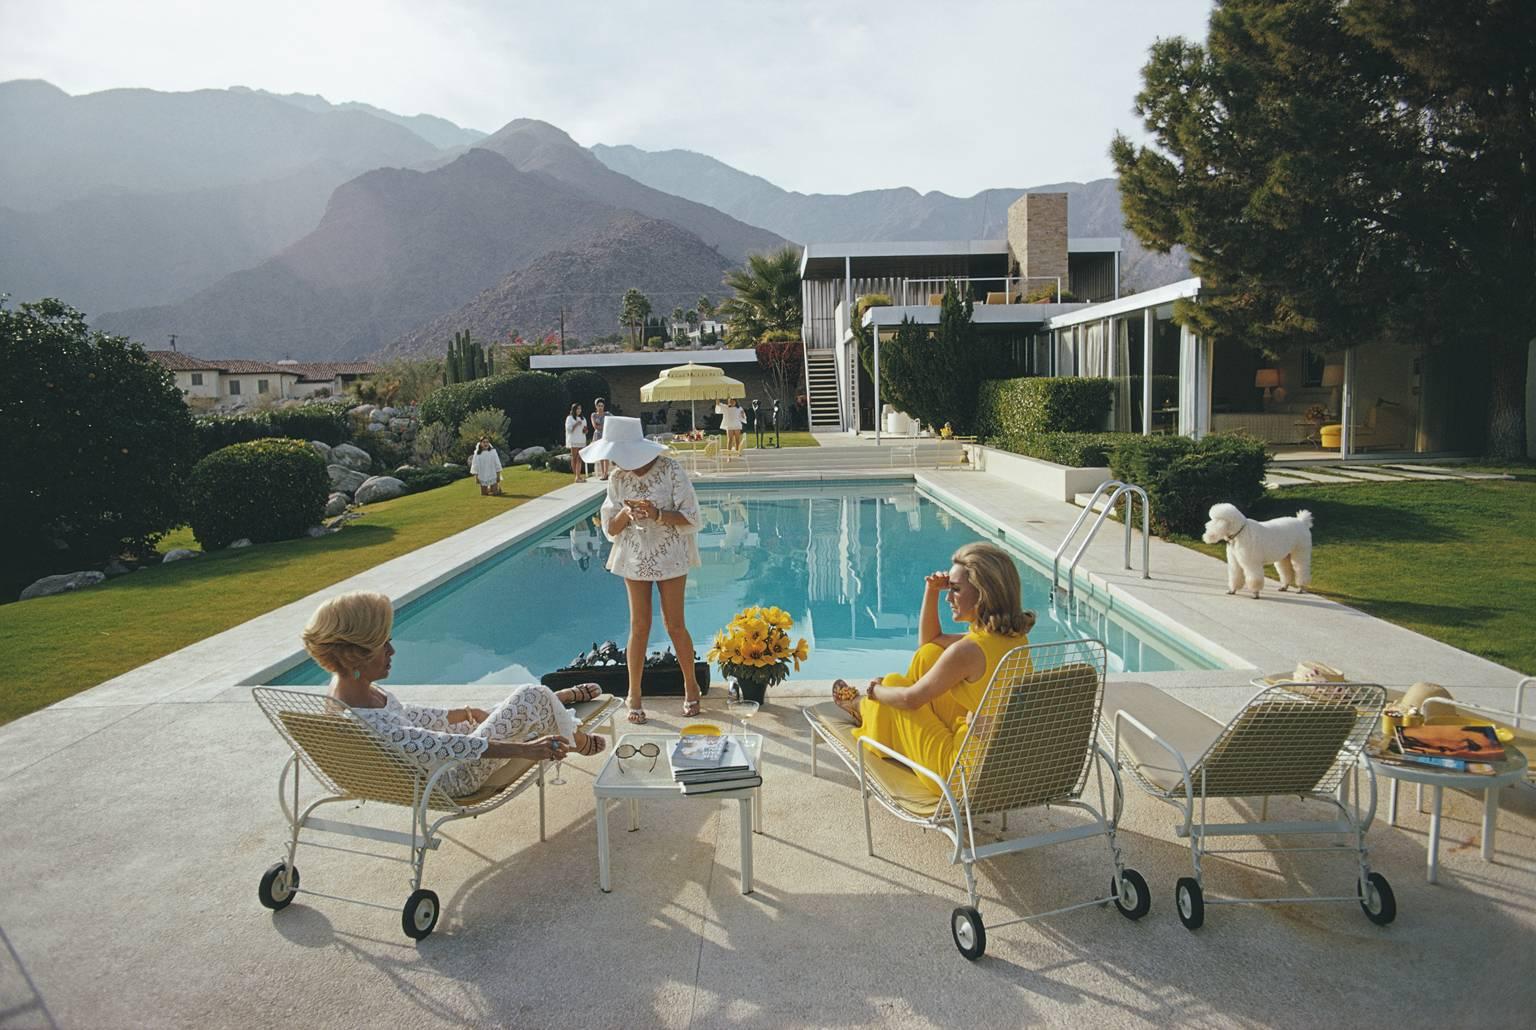 'Desert Kaufmann House' by Slim Aarons 

Set to become another true Slim Aarons Classic - it's better known cousins 'Poolside Gossip'  and 'Desert House Party' (also listed) are considered to be true modern masterpieces of photography - and this new